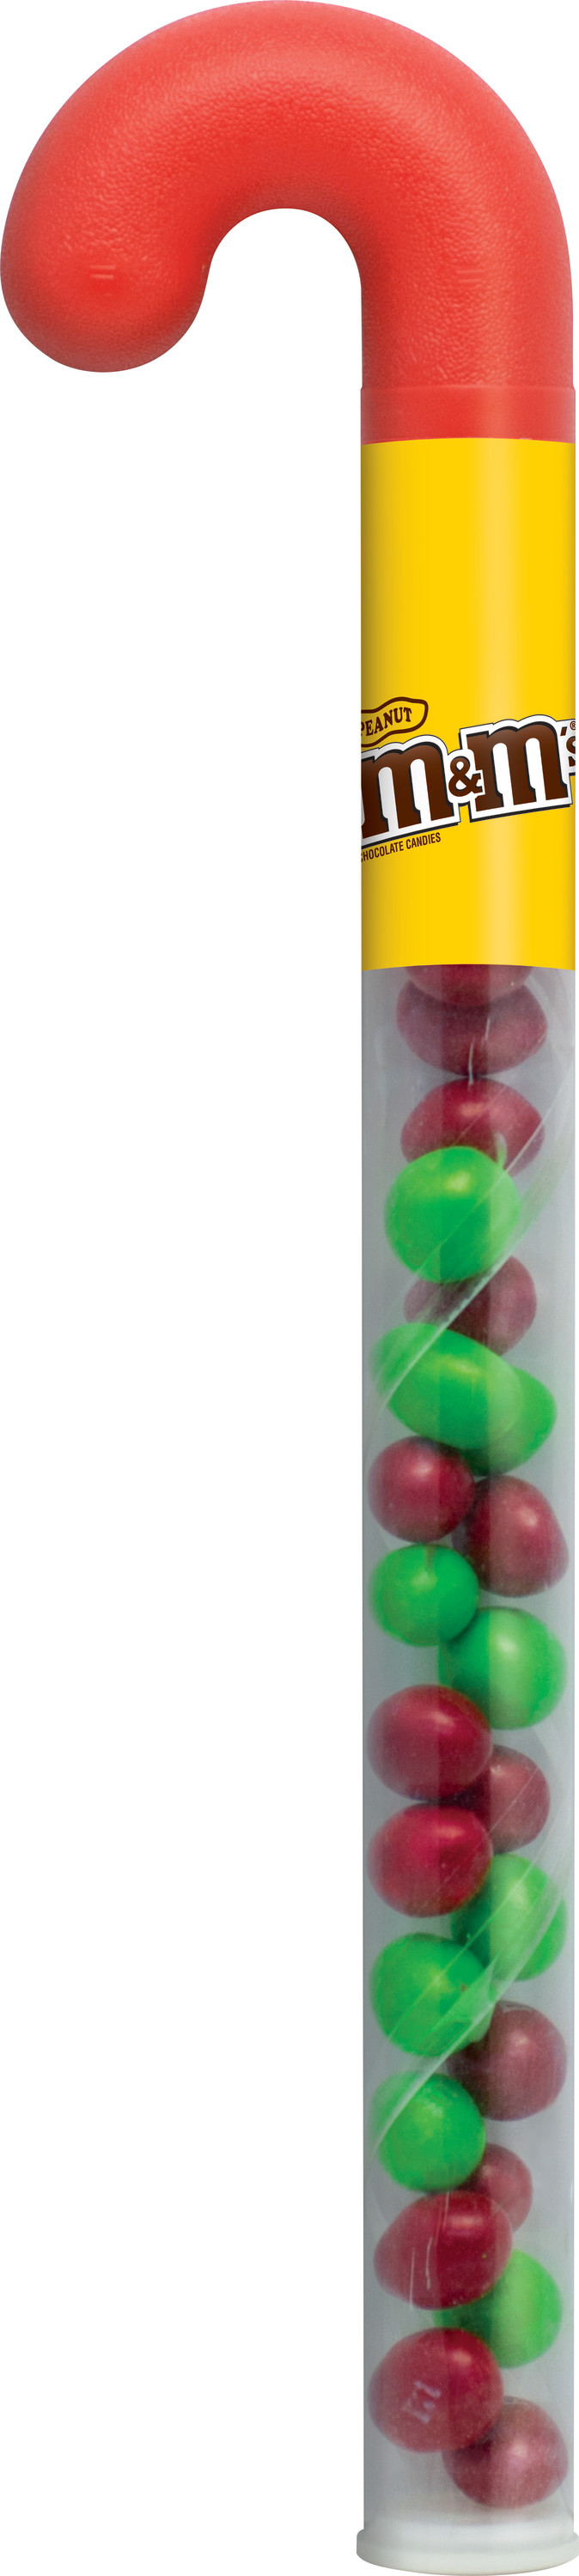 M&M'S Peanut Chocolate, Christmas Candy Canes Tube, 2.12-Ounce Cane - image 1 of 2